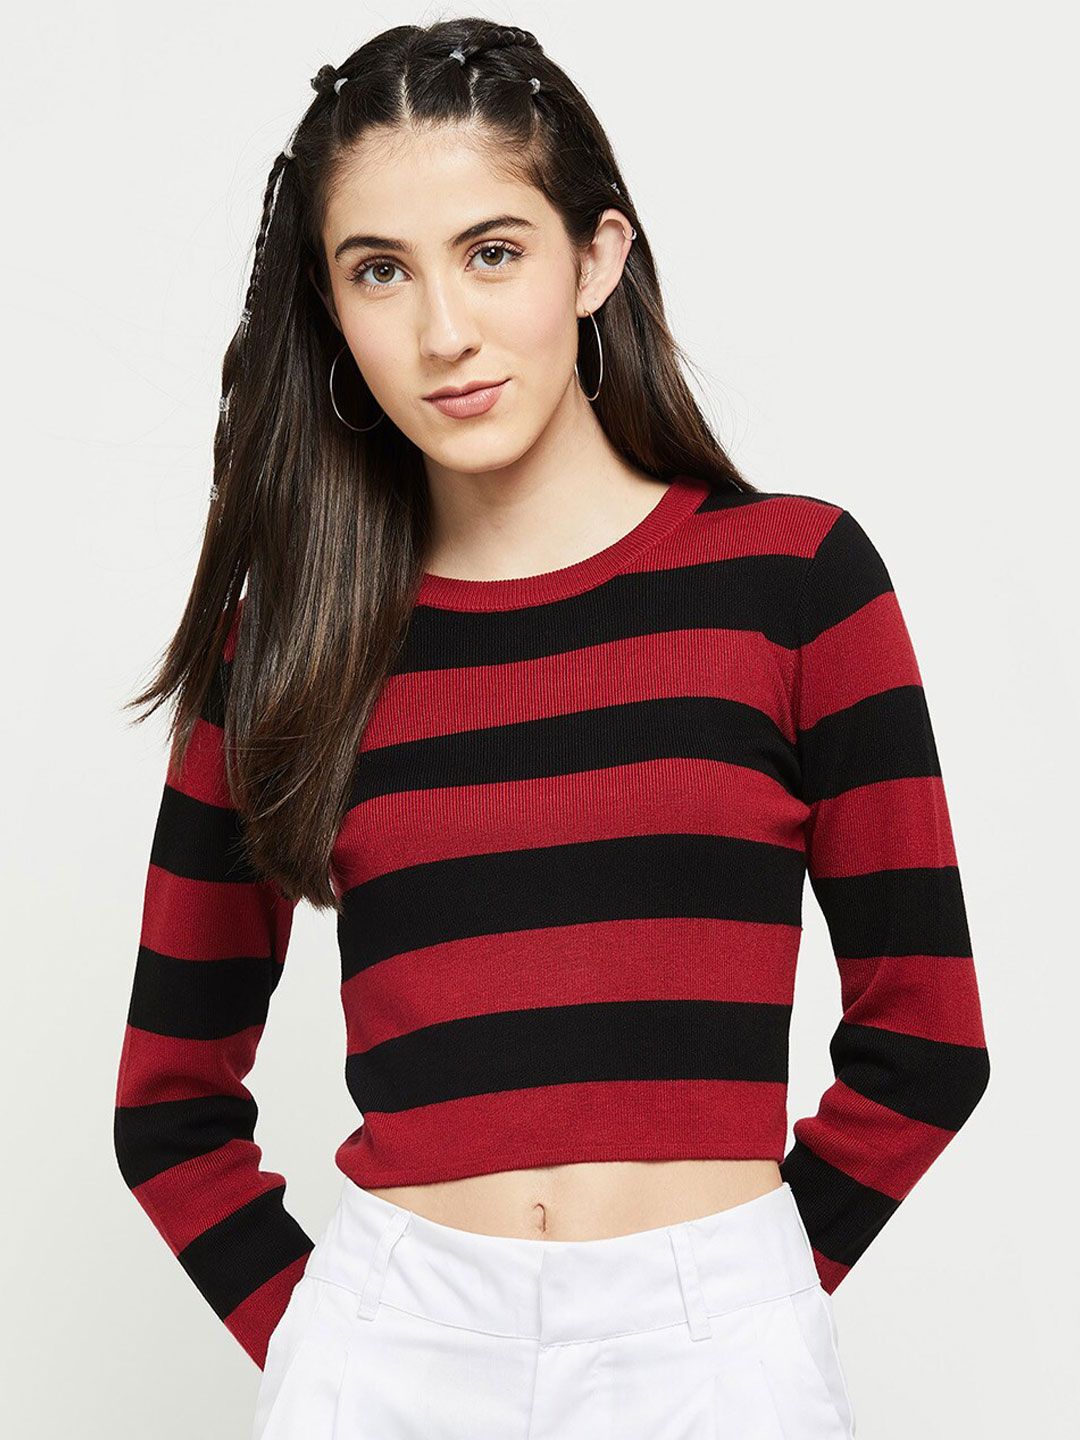 max Red and Black Striped Crop Top Price in India